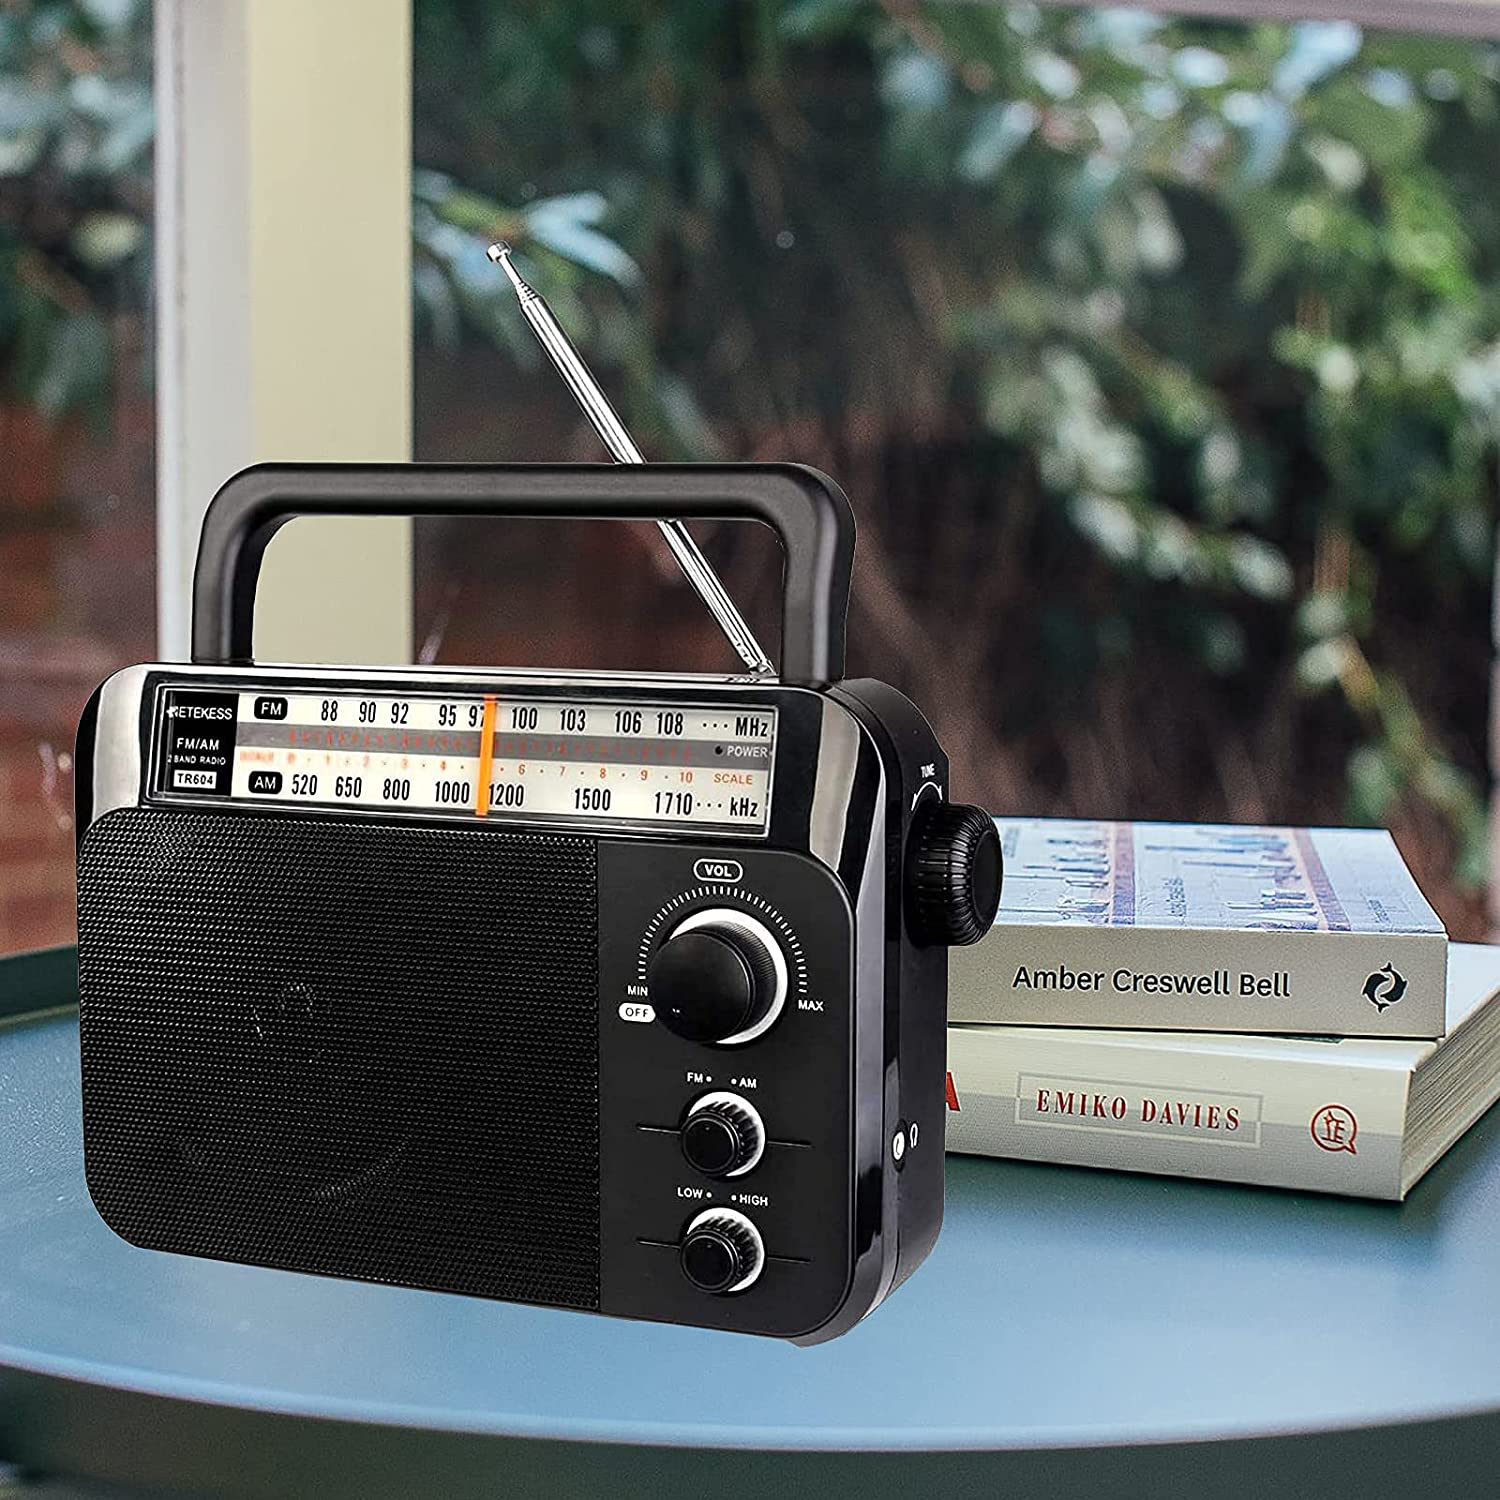 Retekess TR604 AM FM Radio, Portable Radios with Best Reception, AC or D Battery Powered Analog Radio, with Clear Dial and Large Knob, for Home